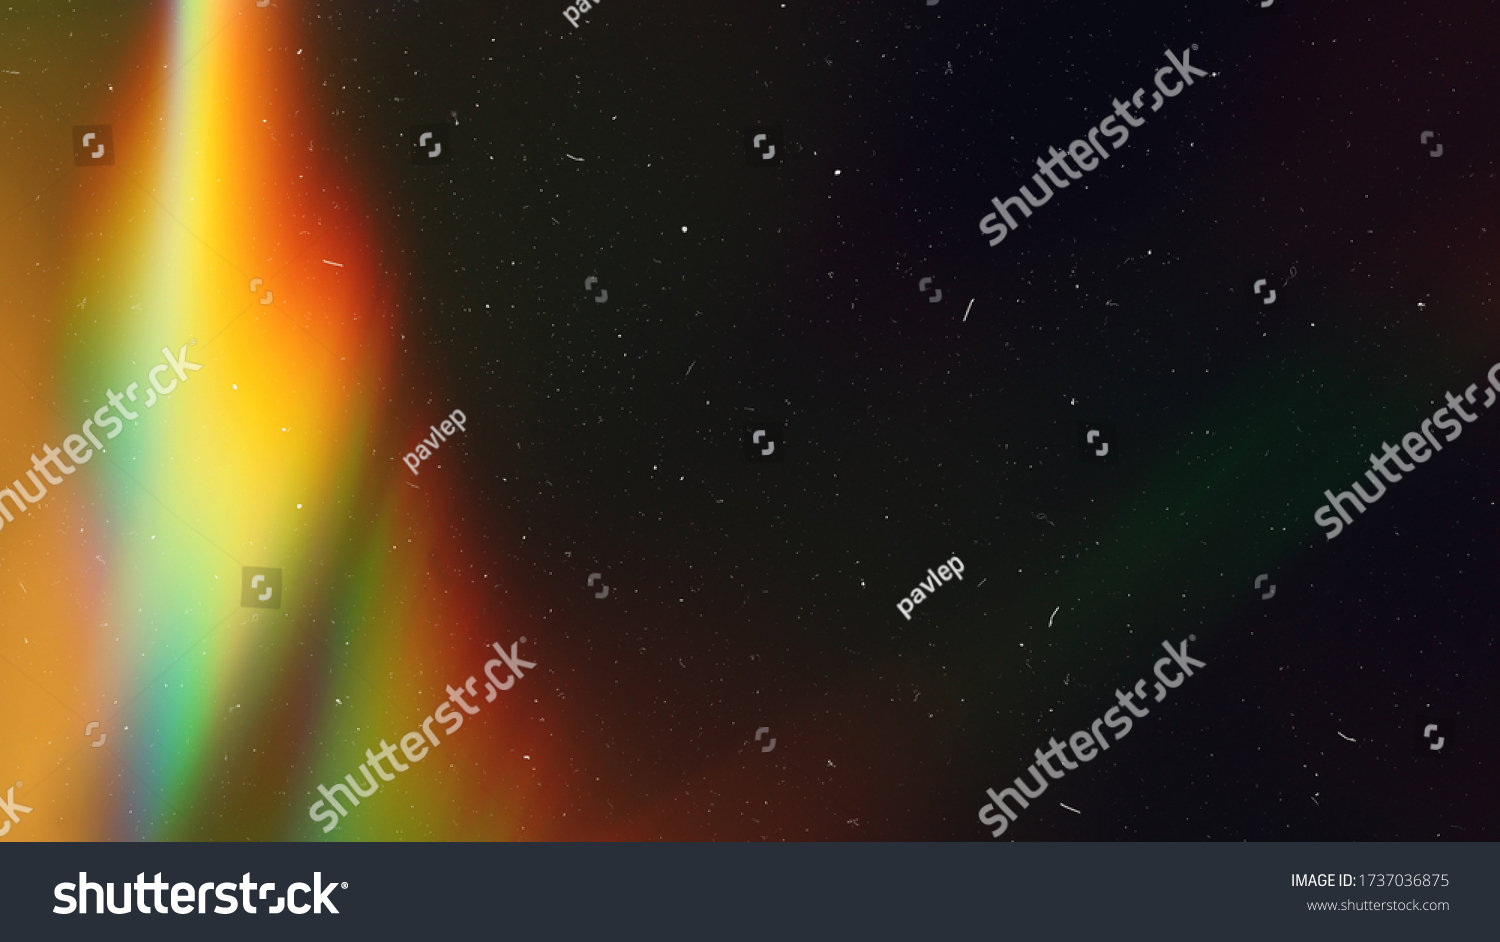 Rainbow Lens Optical Flare Film Dust Overlay Effect Vintage Abstract Bokeh Light Leaks Photo Retro Camera Defocused Blur Reflection Bright Sunlights. Use Screen Overlay Mode for Photo Processing. #1737036875